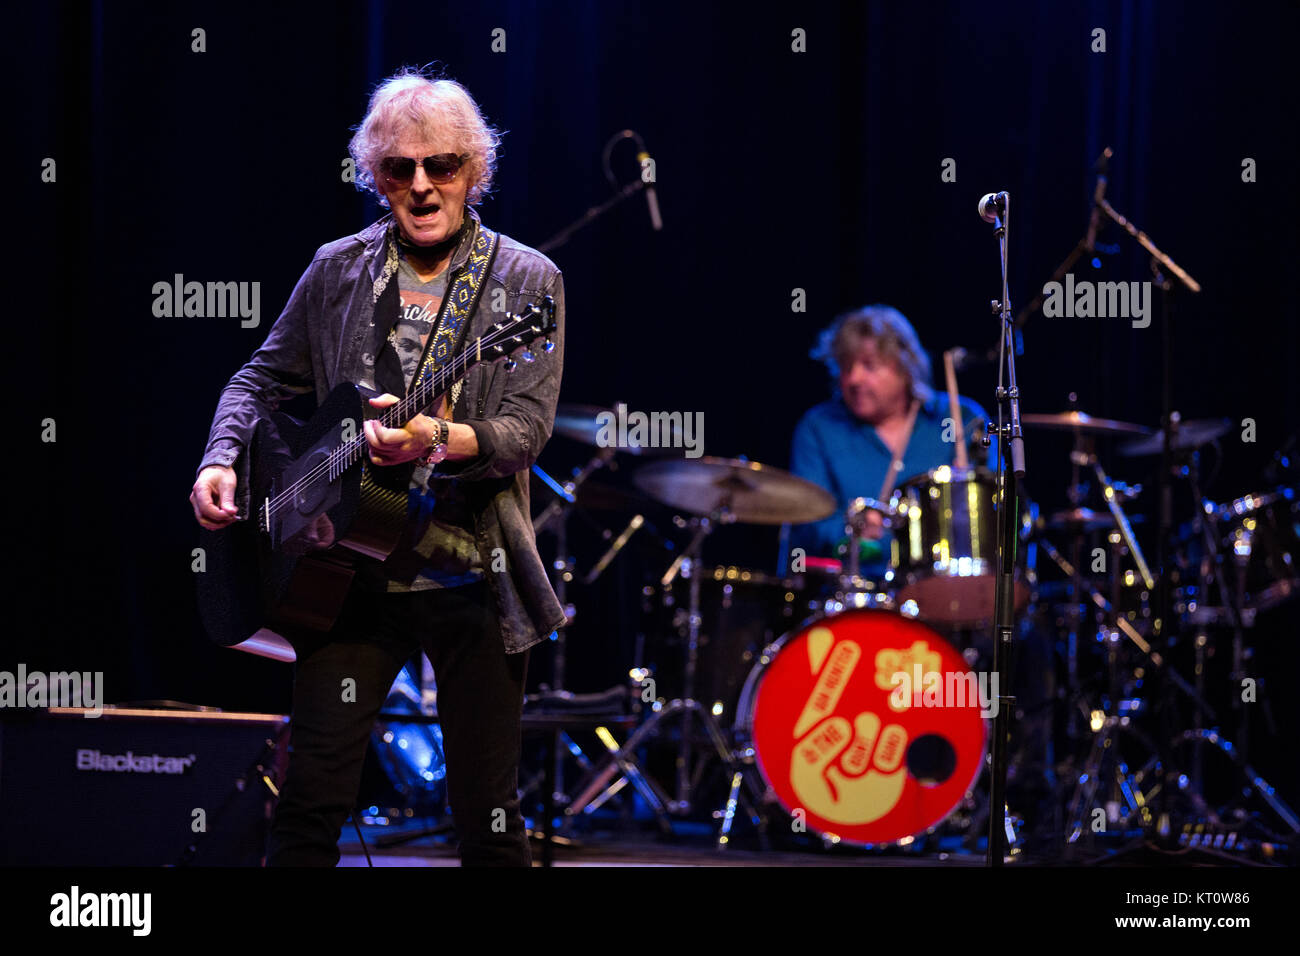 The English singer, songwriter and musician Ian Hunter performs a live concert with The Rant Band at Oslo Konserthus in Oslo. Norway, 11/06 2017. Stock Photo